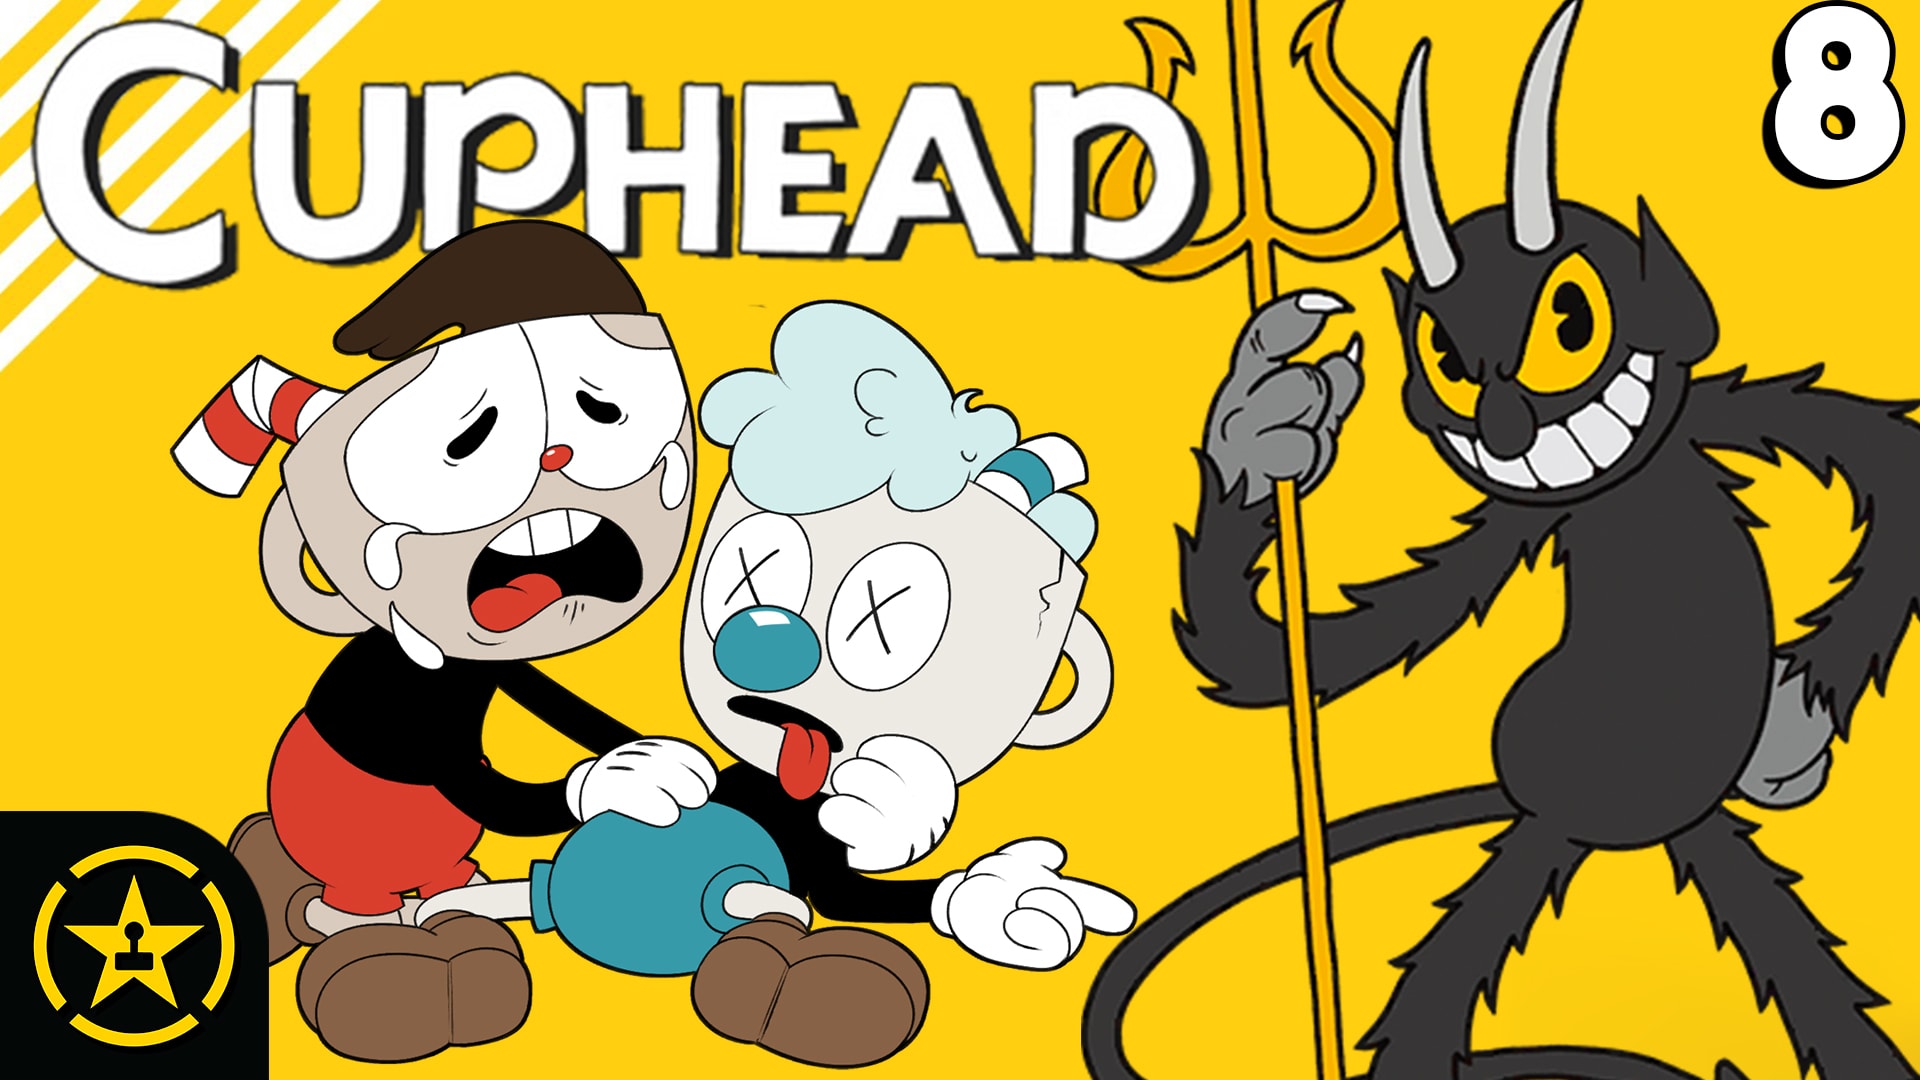 The Cuphead Show! ending explained: How did Cuphead and Mugman get